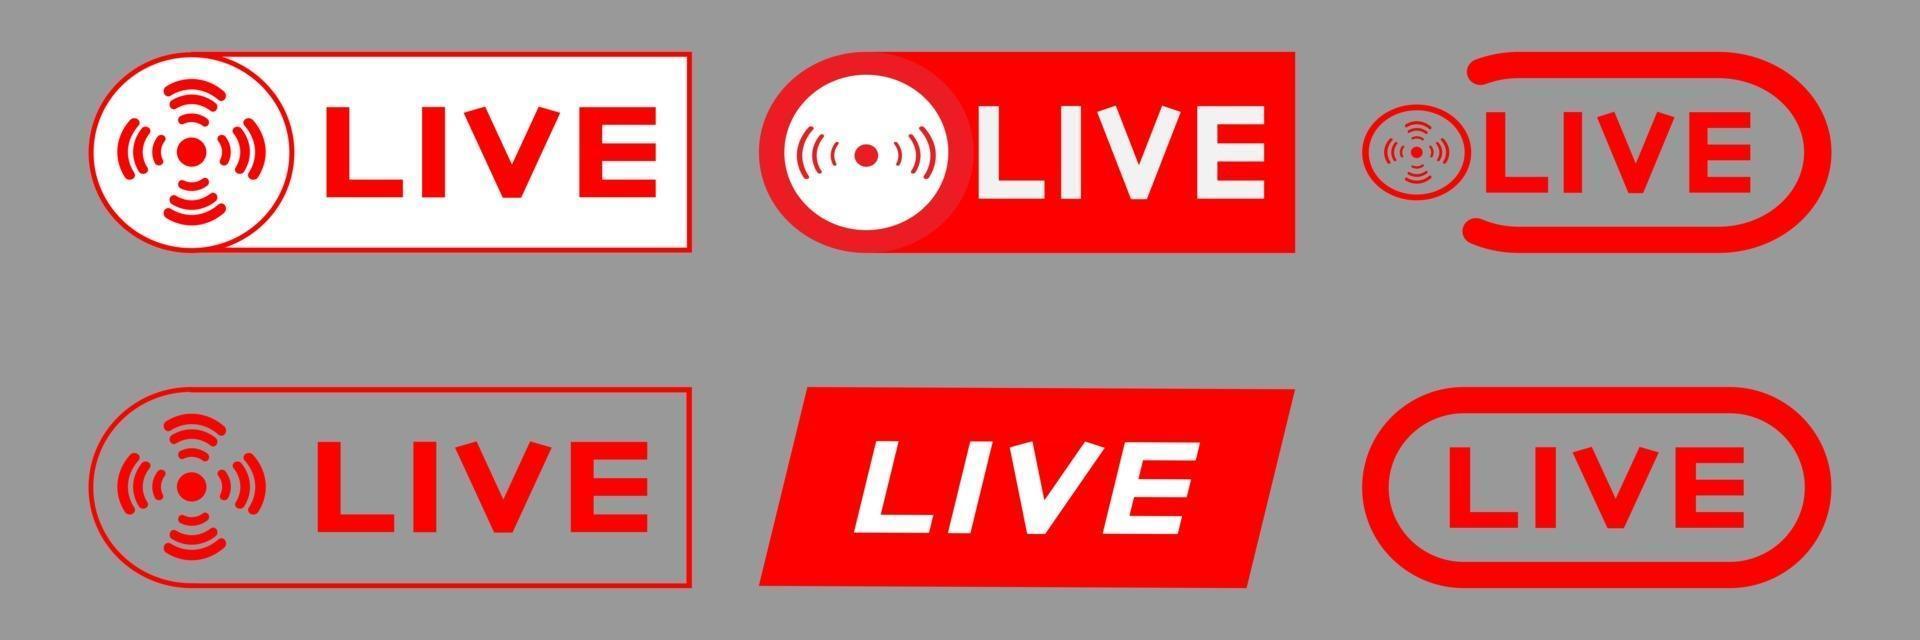 Live broadcasting icons set vector